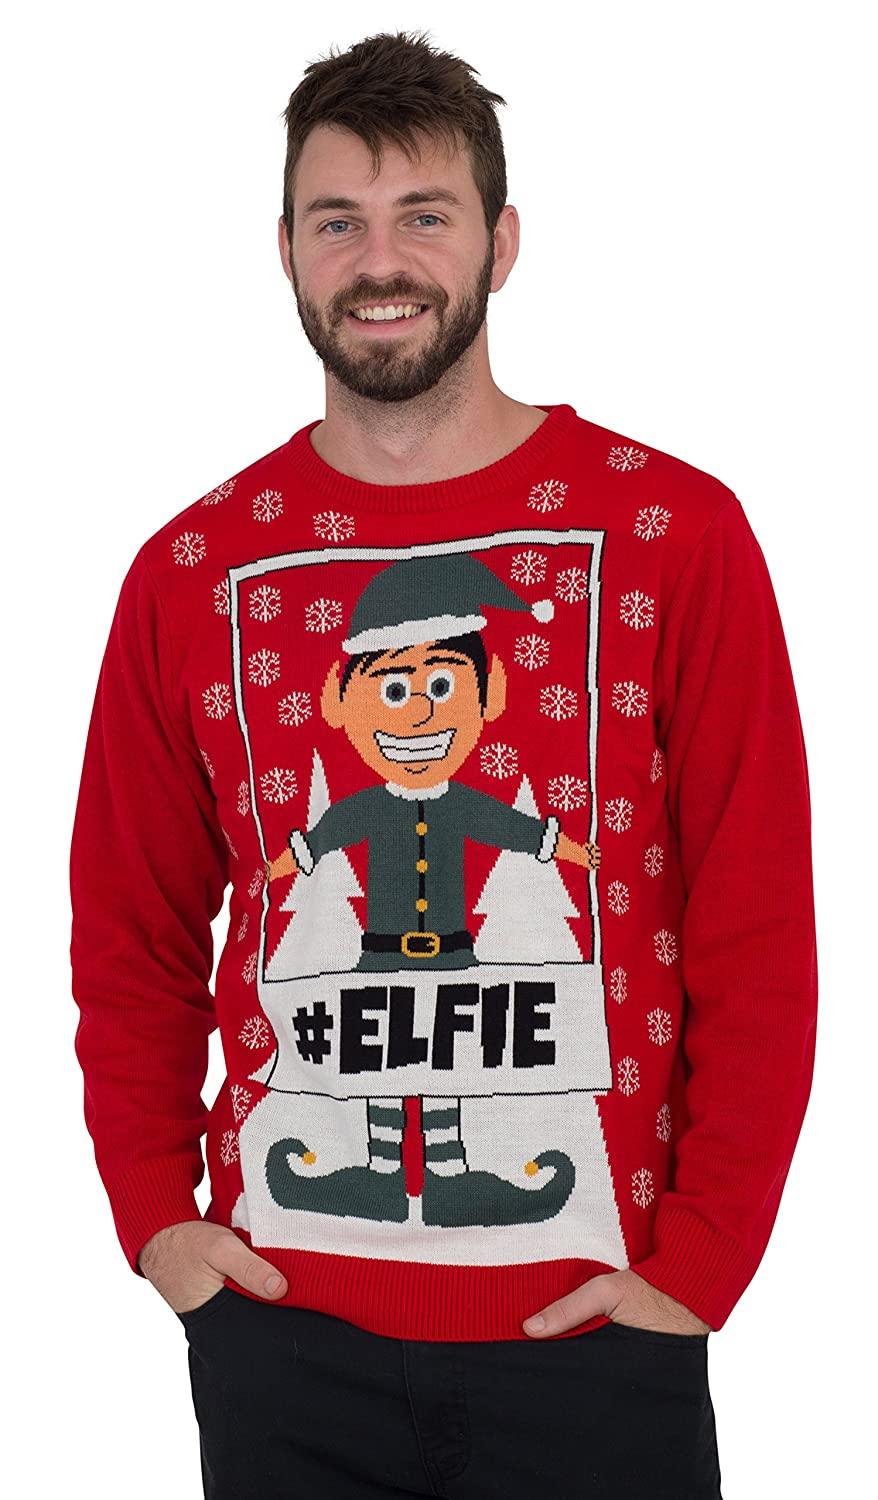 #Elfie Hashtag Elf with Snowflakes Ugly Christmas Sweater - TVStoreOnline